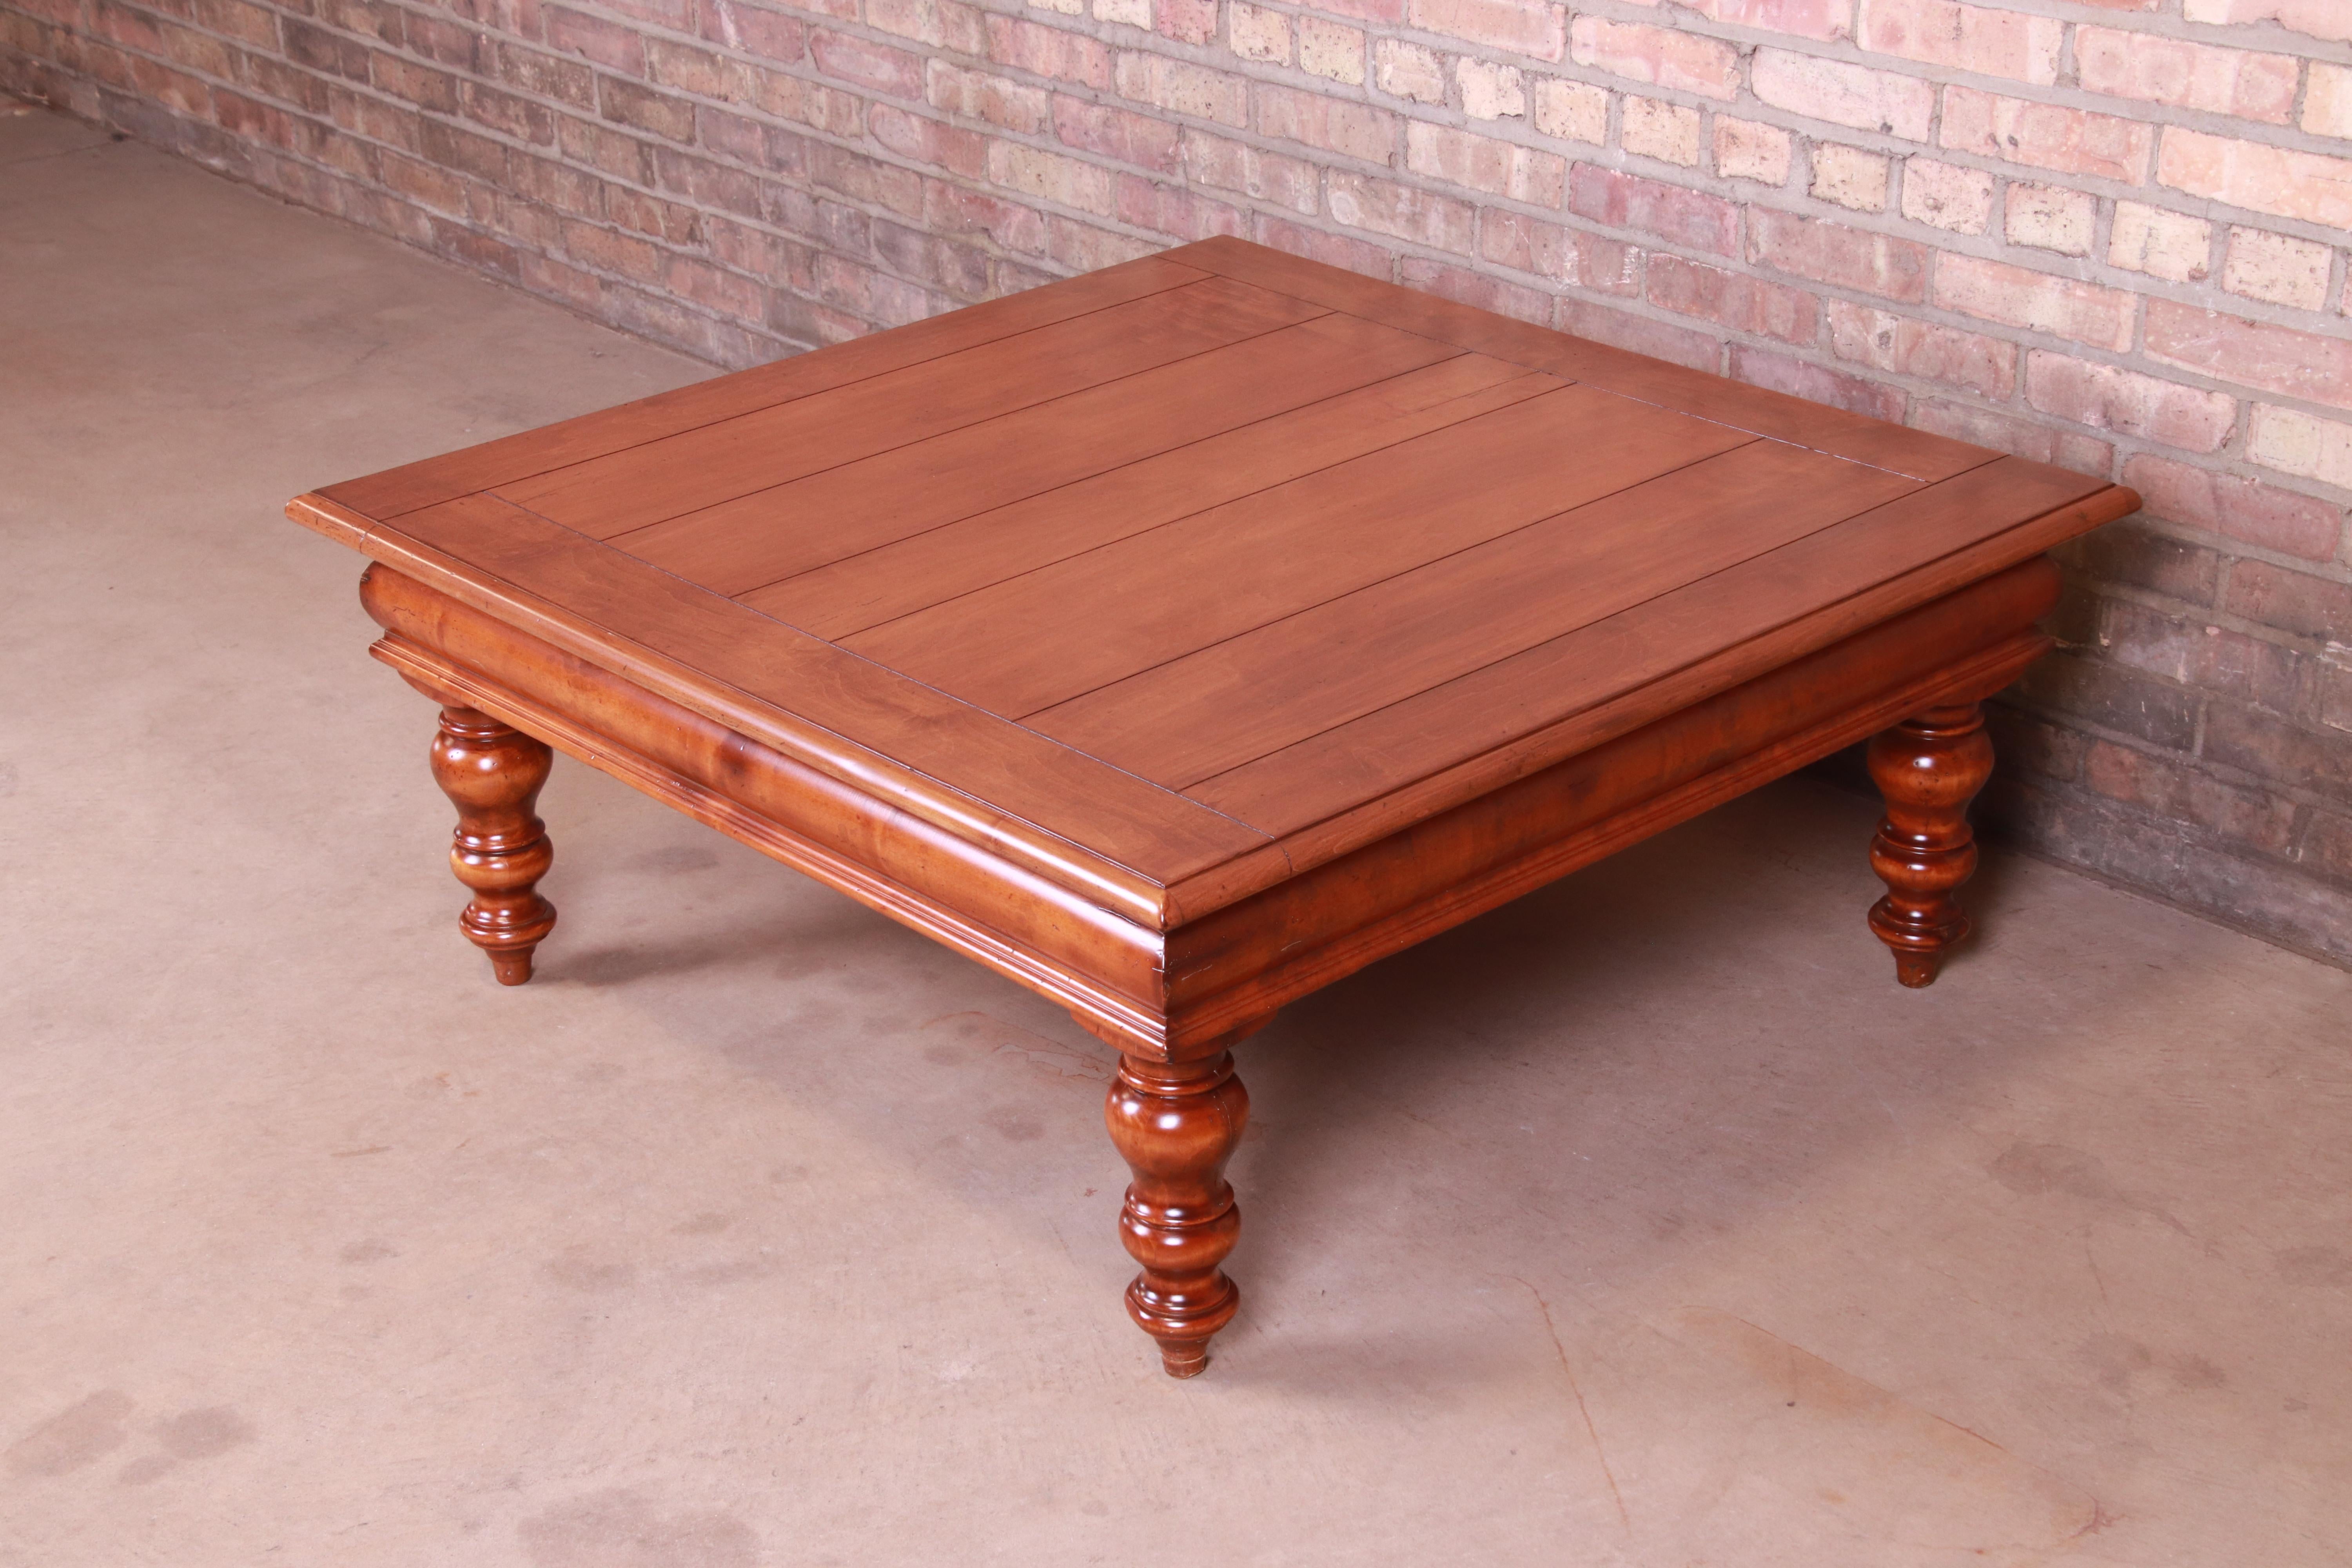 French Provincial Baker Furniture Italian Provincial Maple Coffee Table, Newly Refinished For Sale